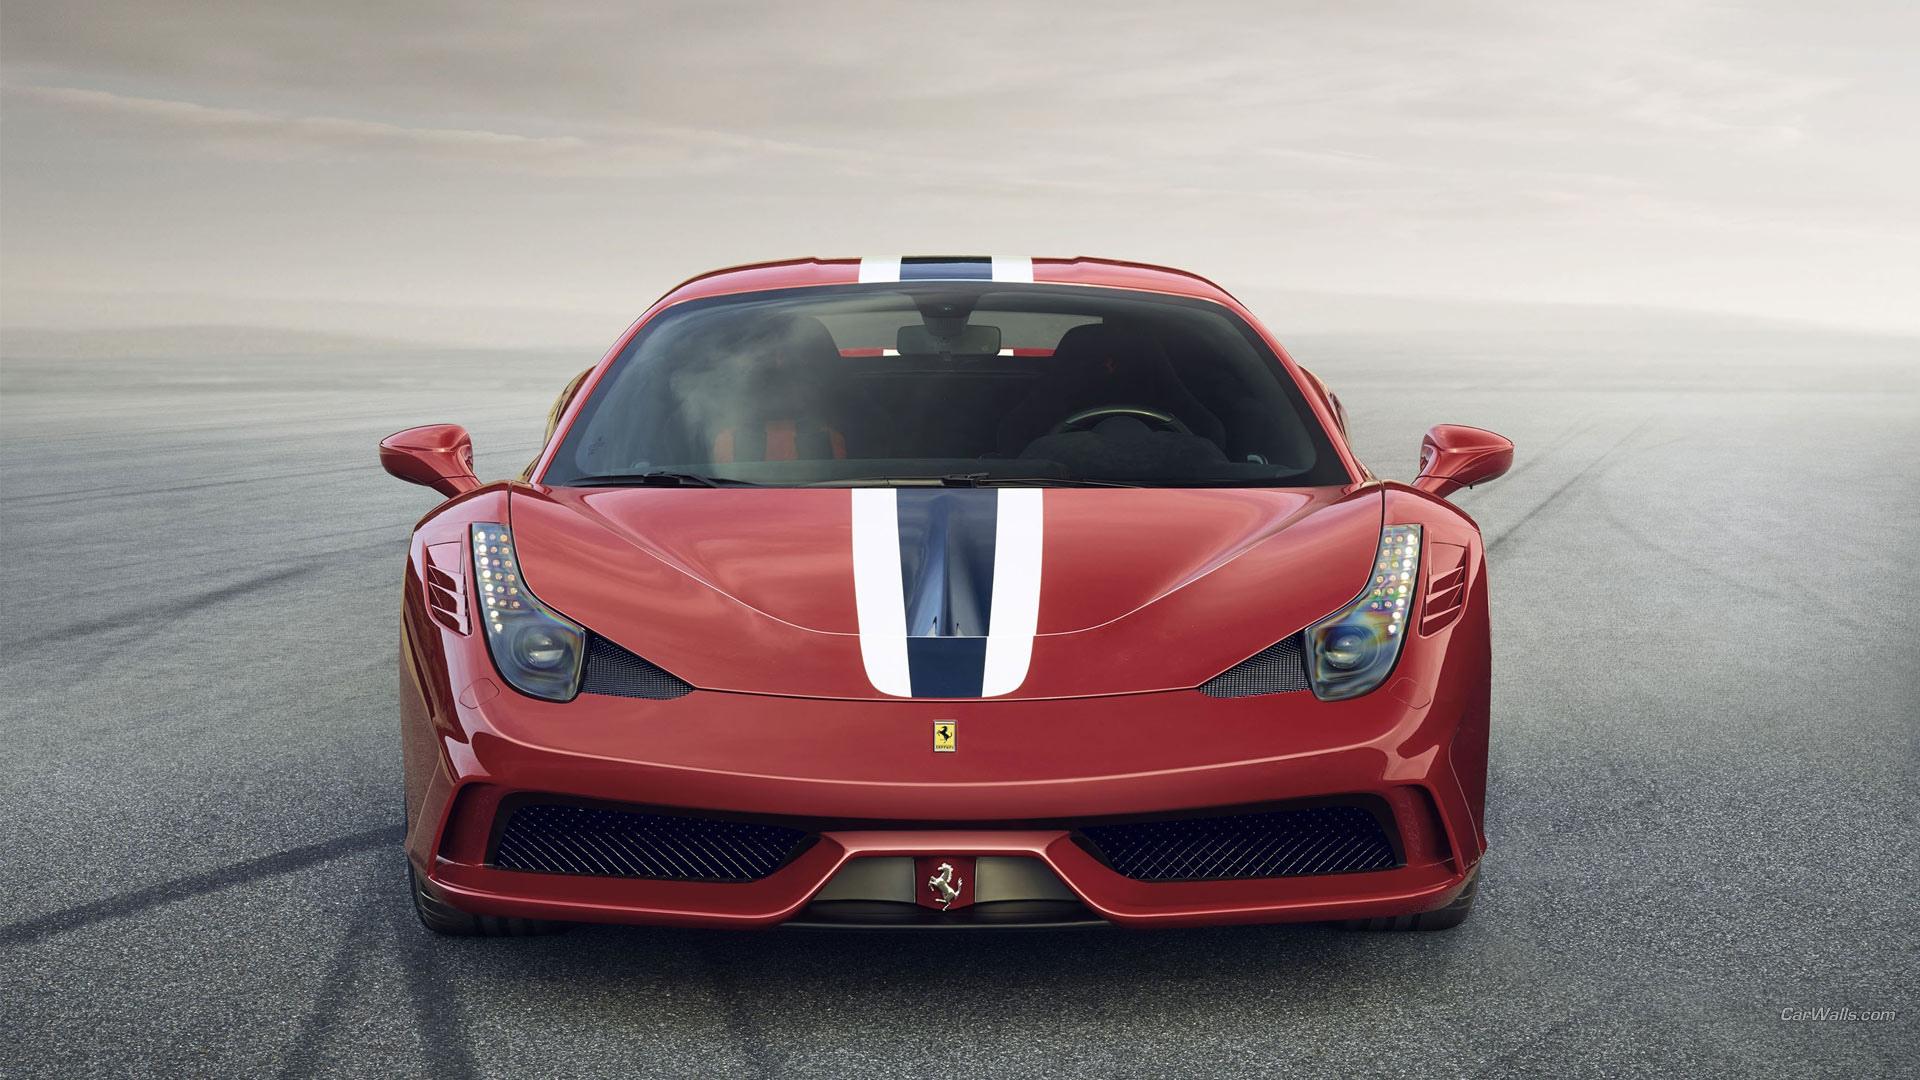 Ferrari 458 Speciale wallpapers HD quality